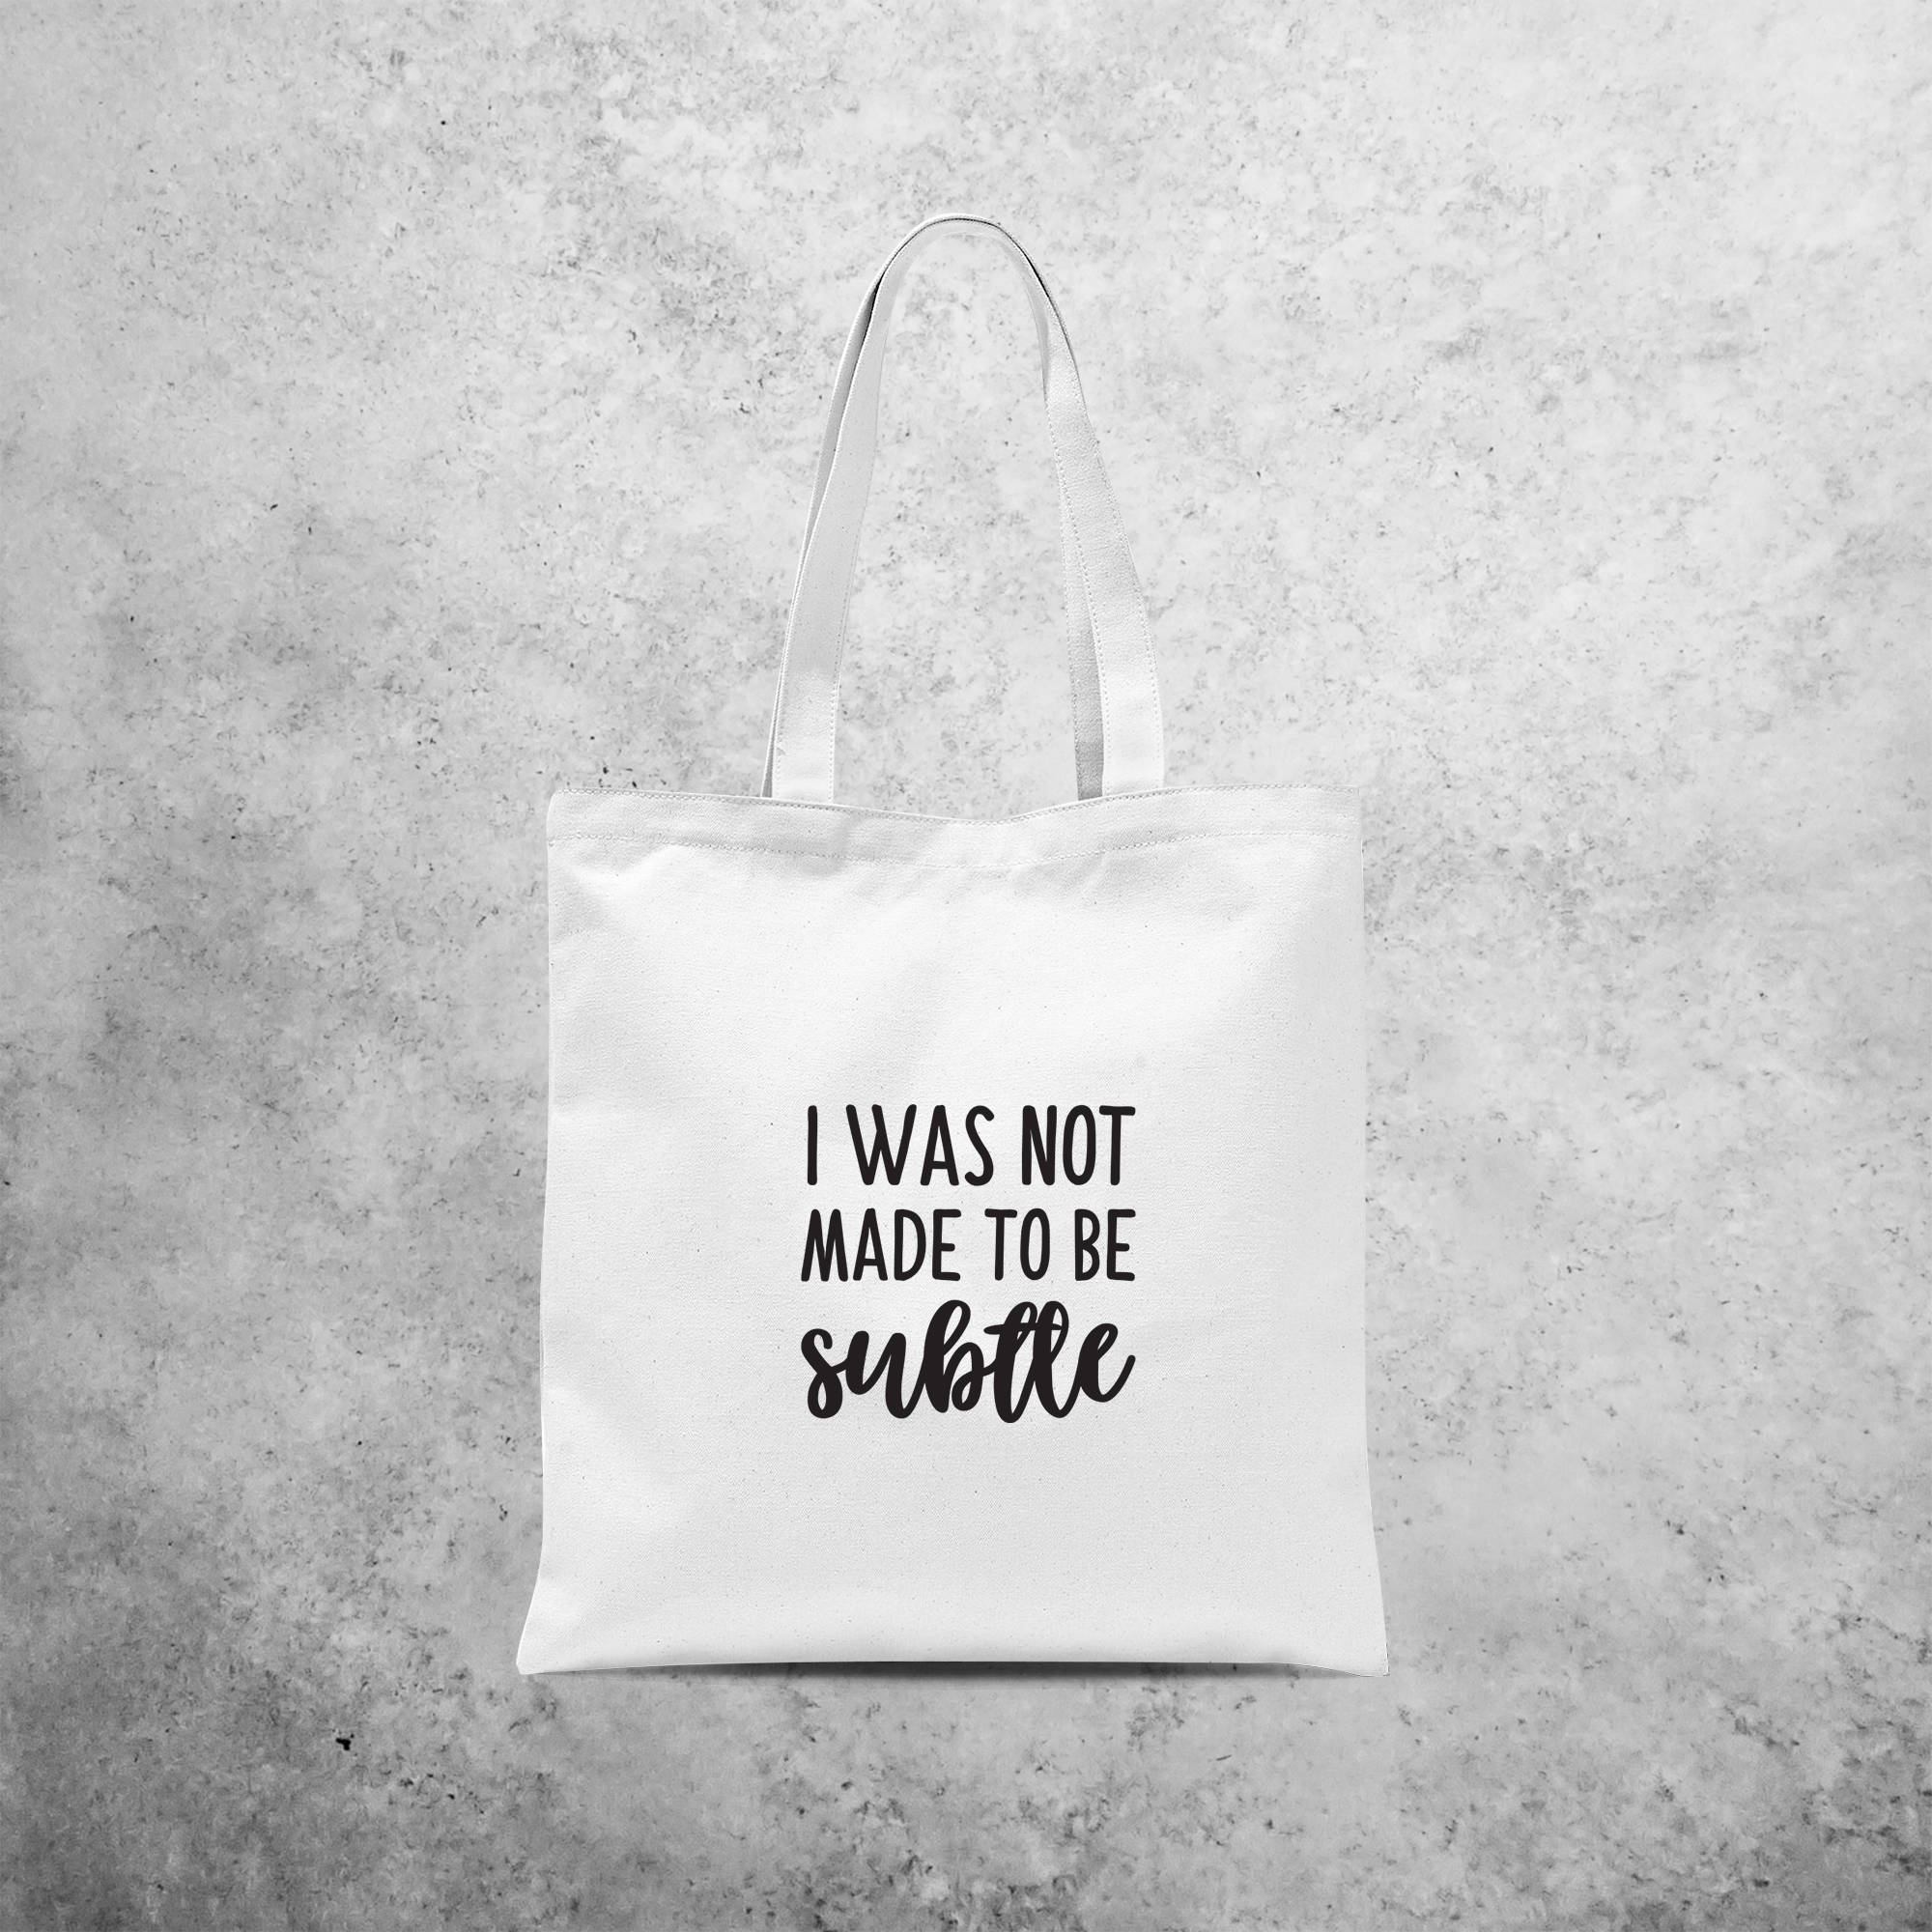 'I was not made to be subtle' tote bag